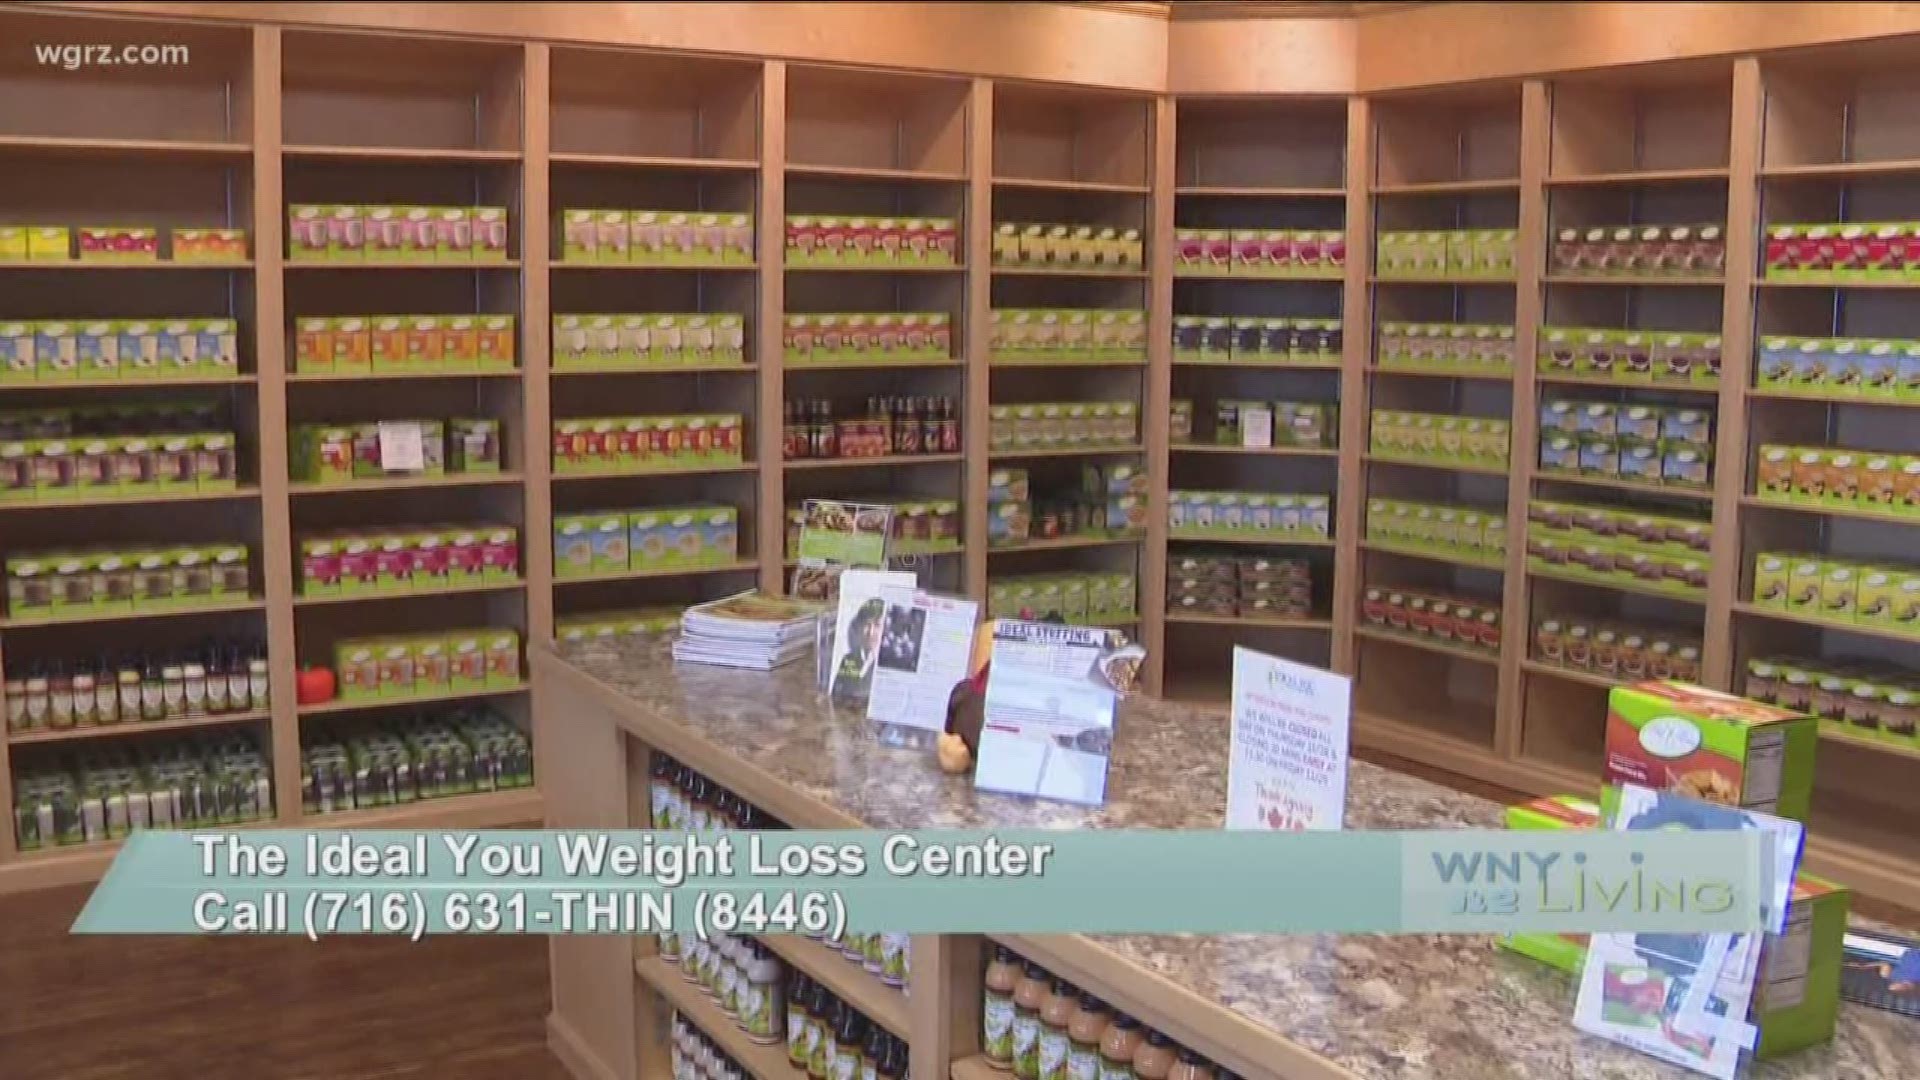 January 18 - The Ideal You Weight Loss Center (THIS VIDEO IS SPONSORED BY THE IDEAL YOU WEIGHT LOSS CENTER)